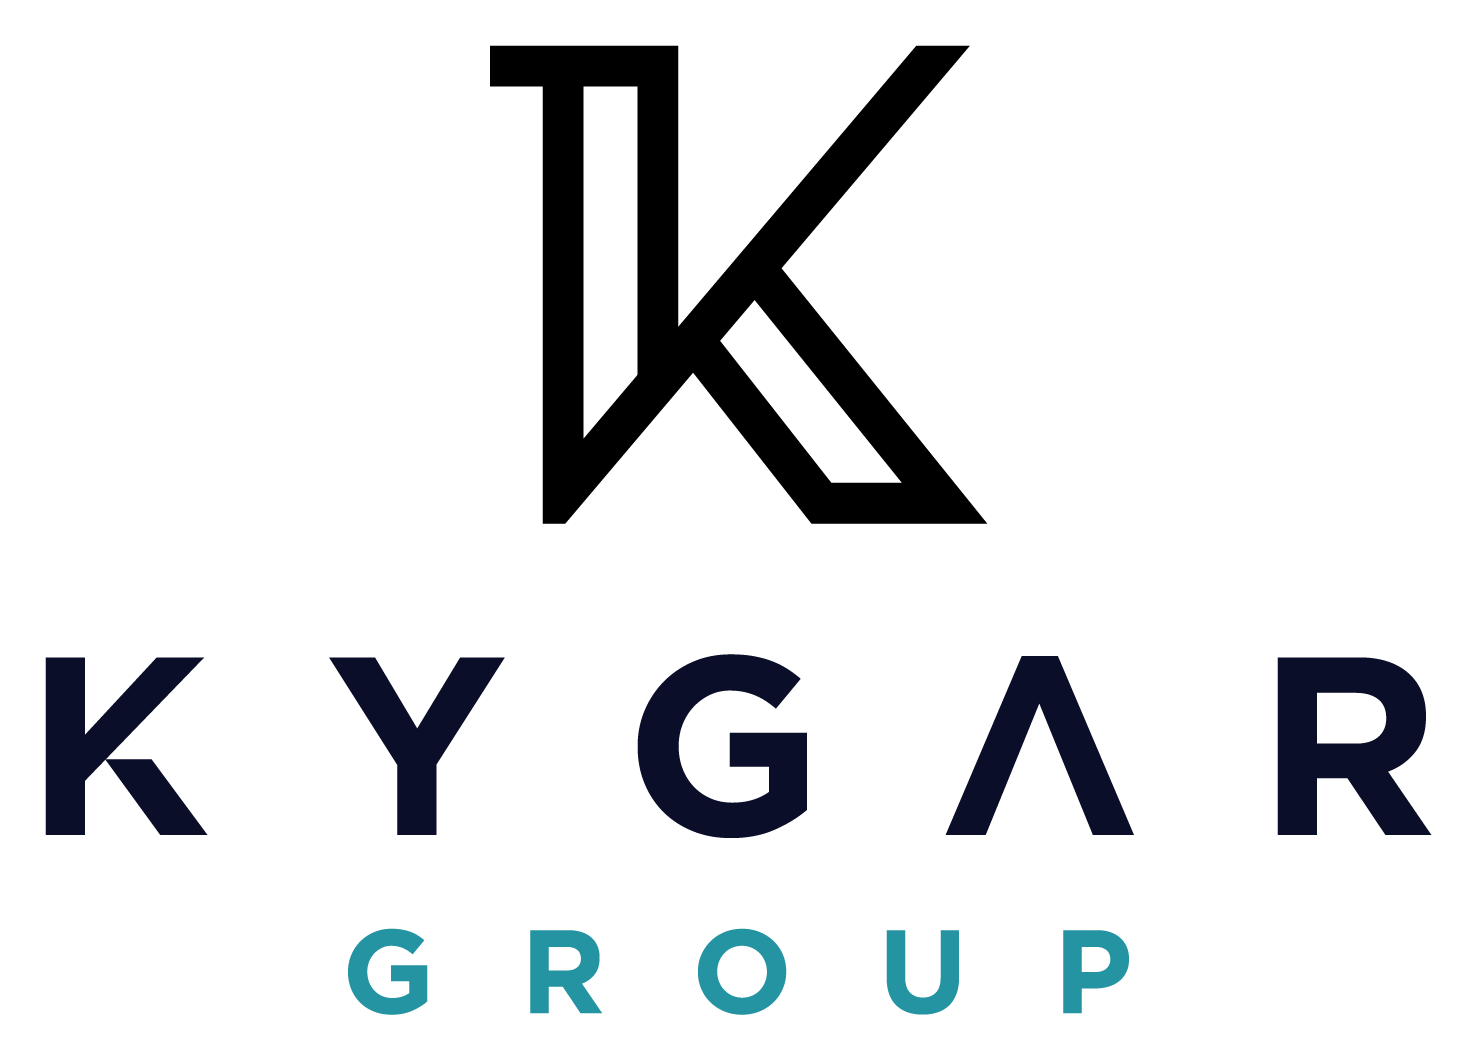 Welcome to the Kygar Group